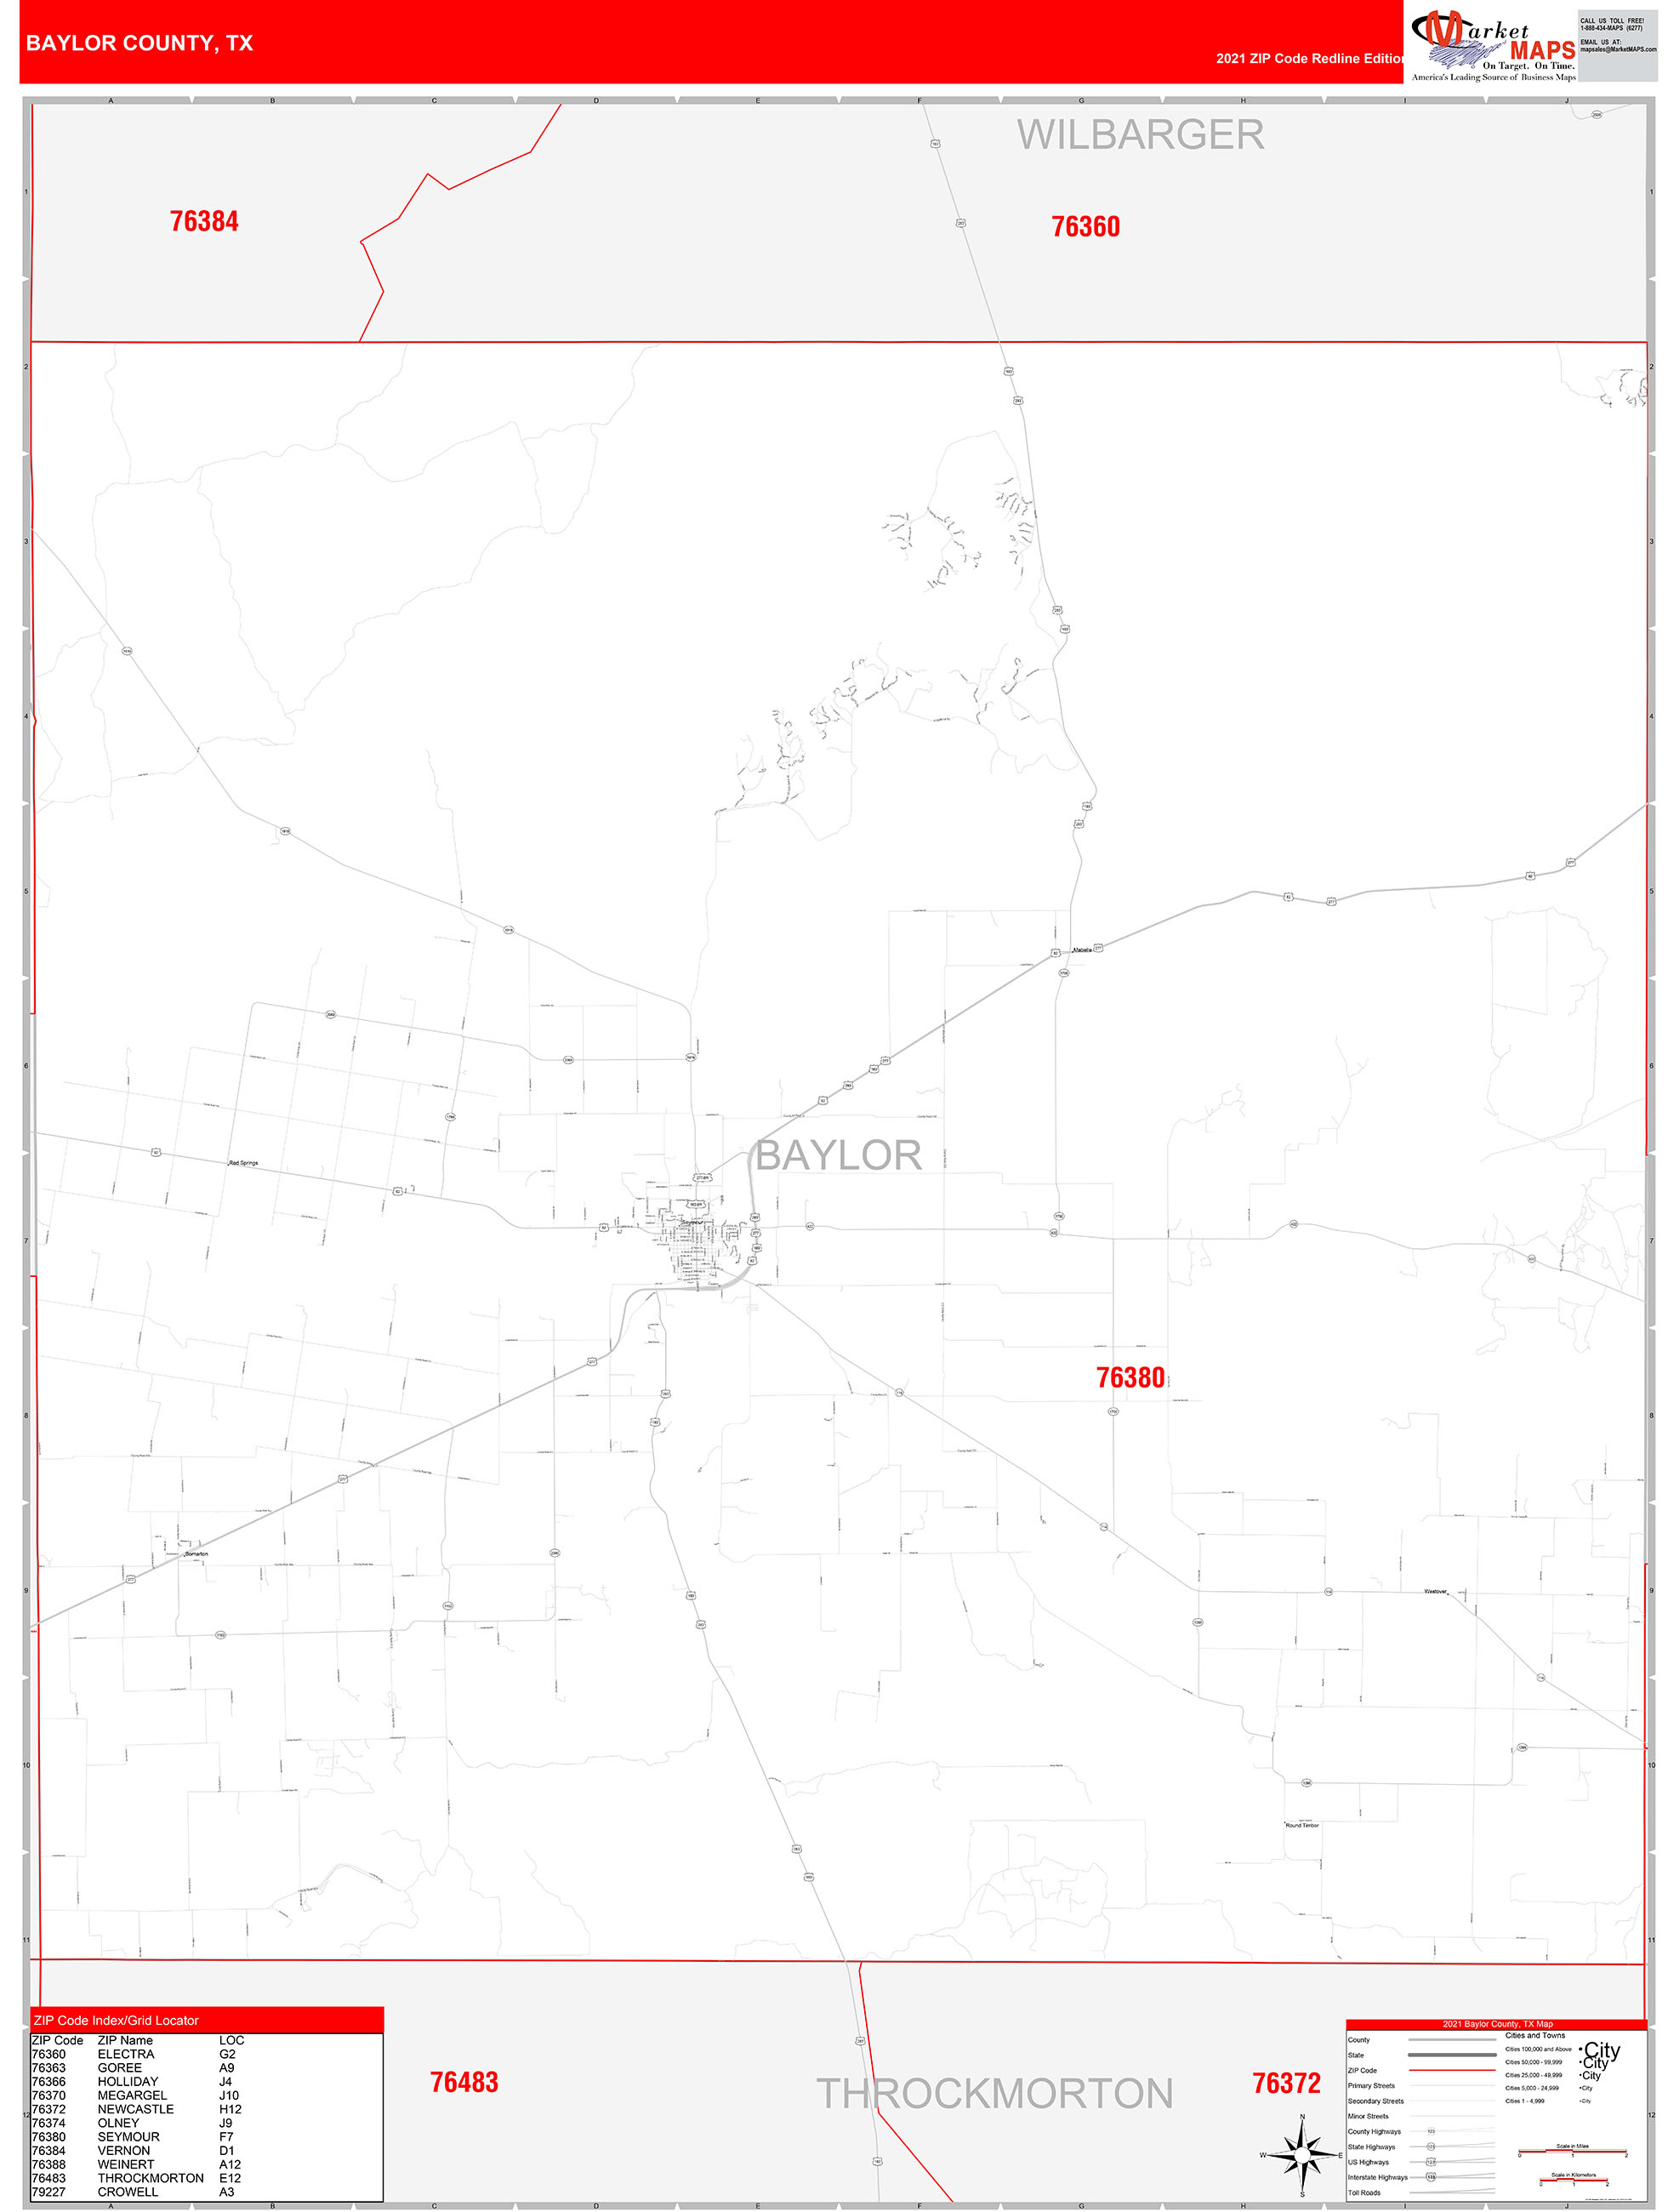 Baylor County Tx Zip Code Wall Map Red Line Style By Marketmaps